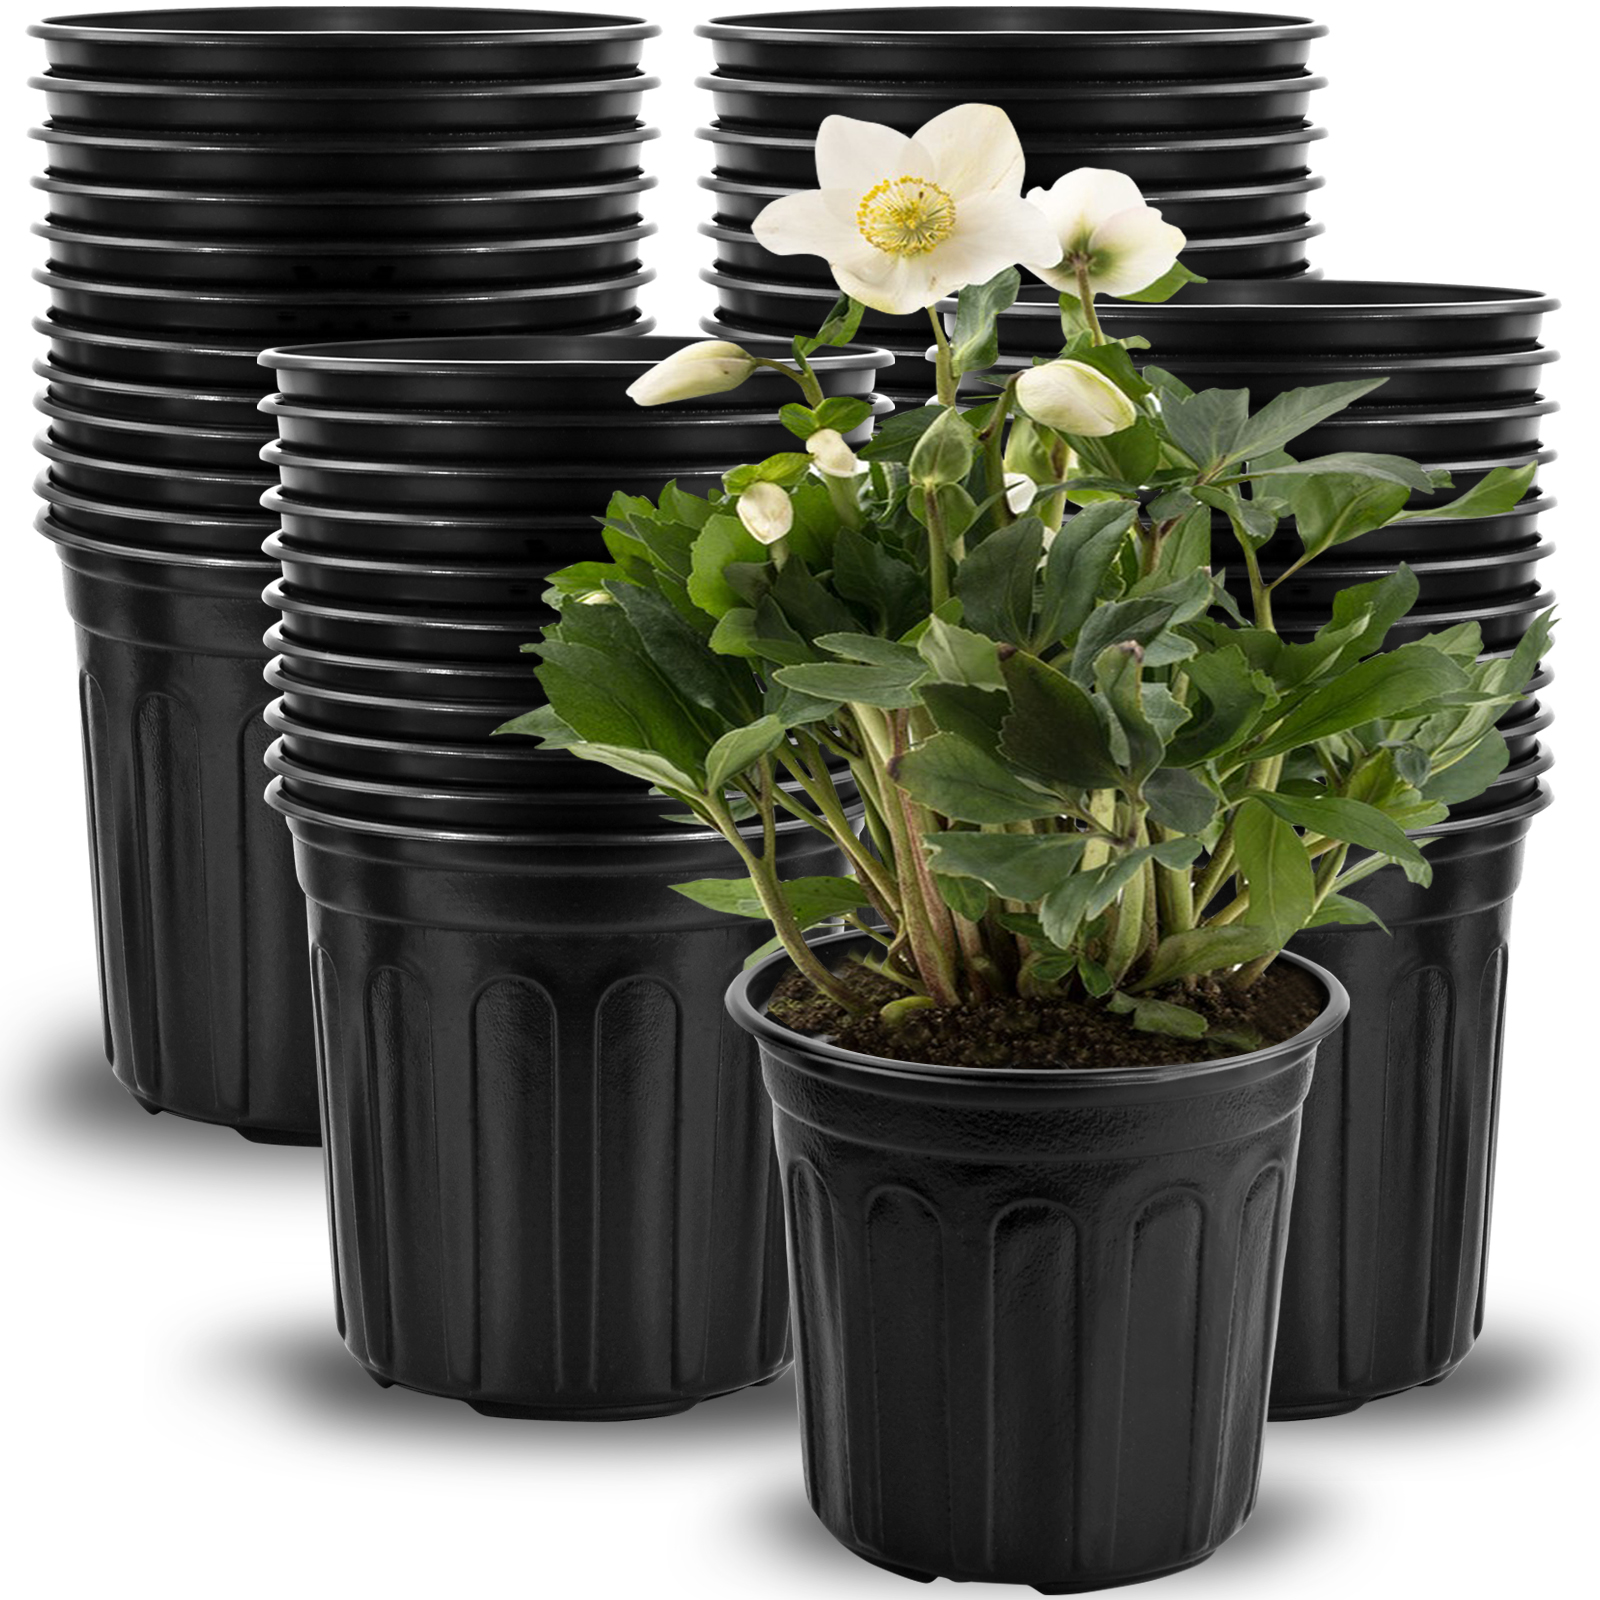 

48 Packs, 1 Gallon Soft Plant Nursery Pots, Thickened Soft Plastic Nursery Pots, Water Permeable And Breathable Black